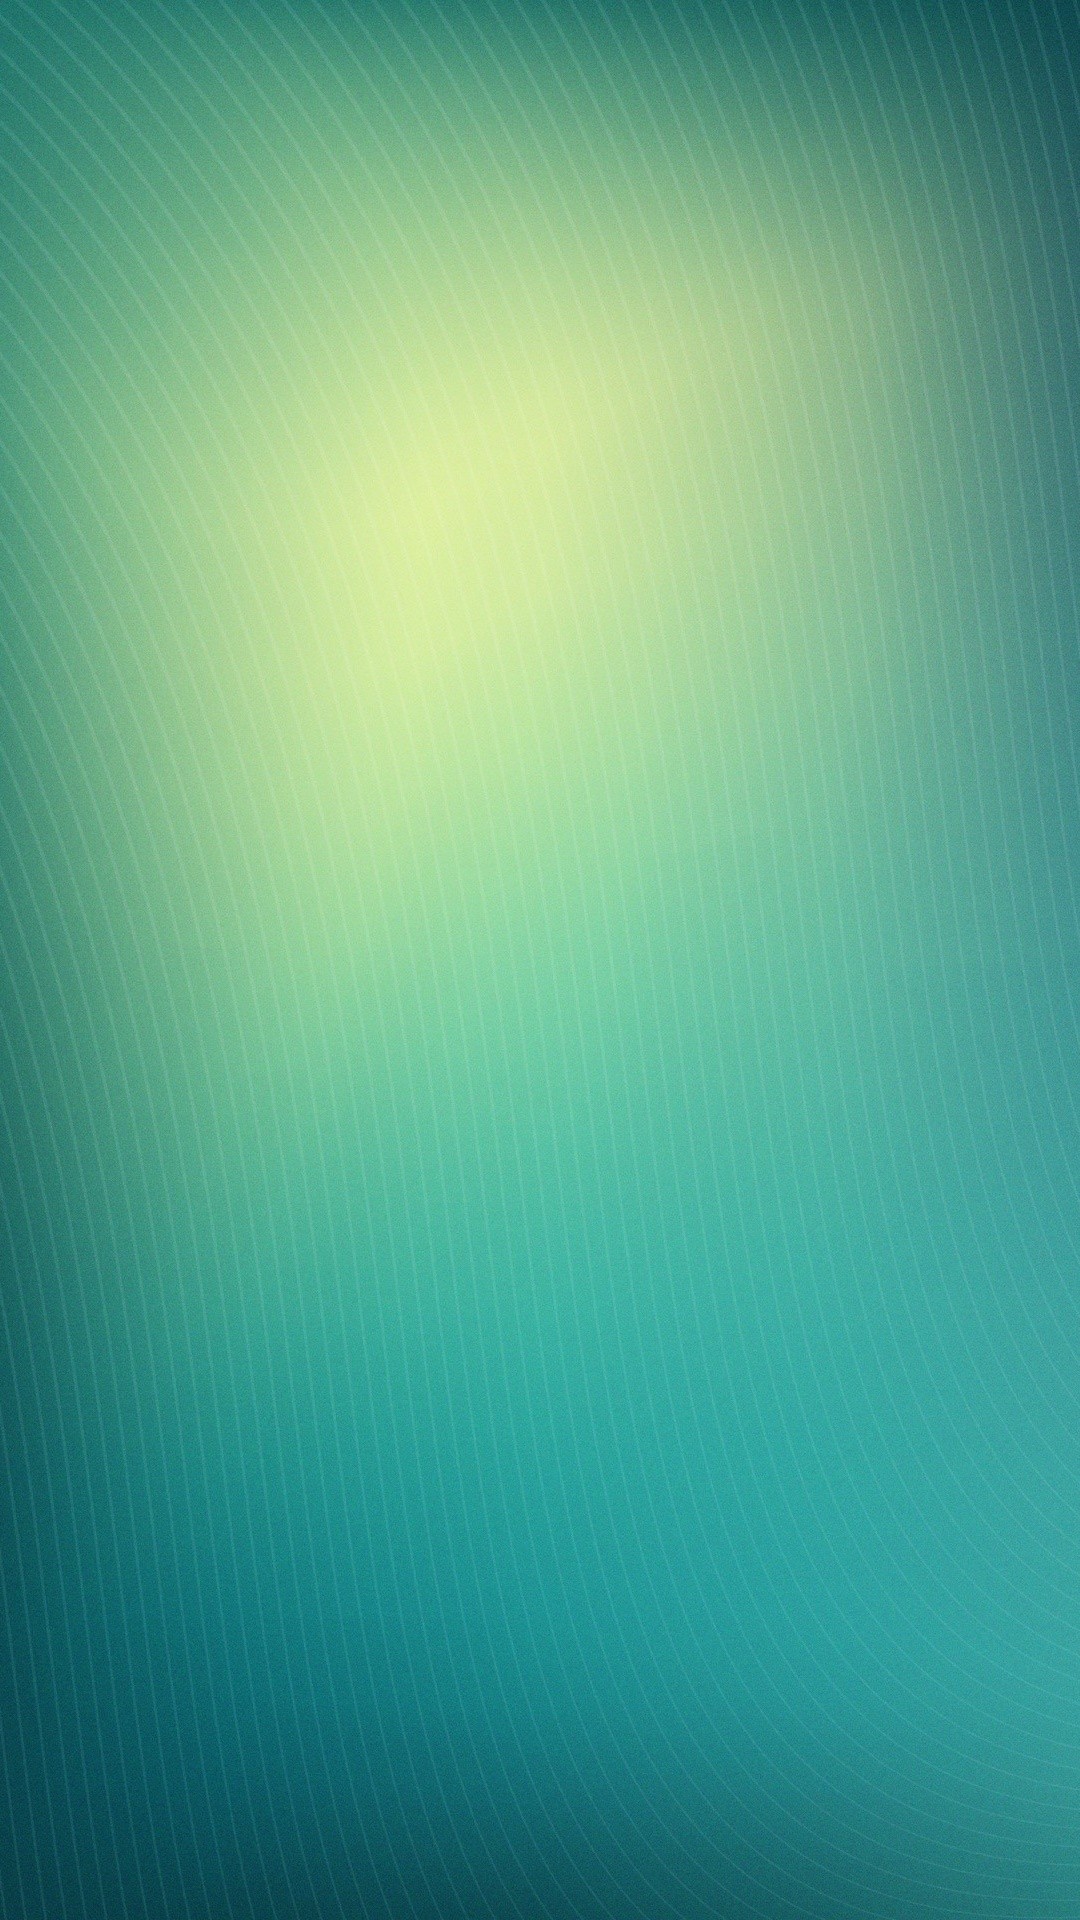 1080x1920 18 Calming blurred lights and gradients wallpapers for iPhone - @mobile9